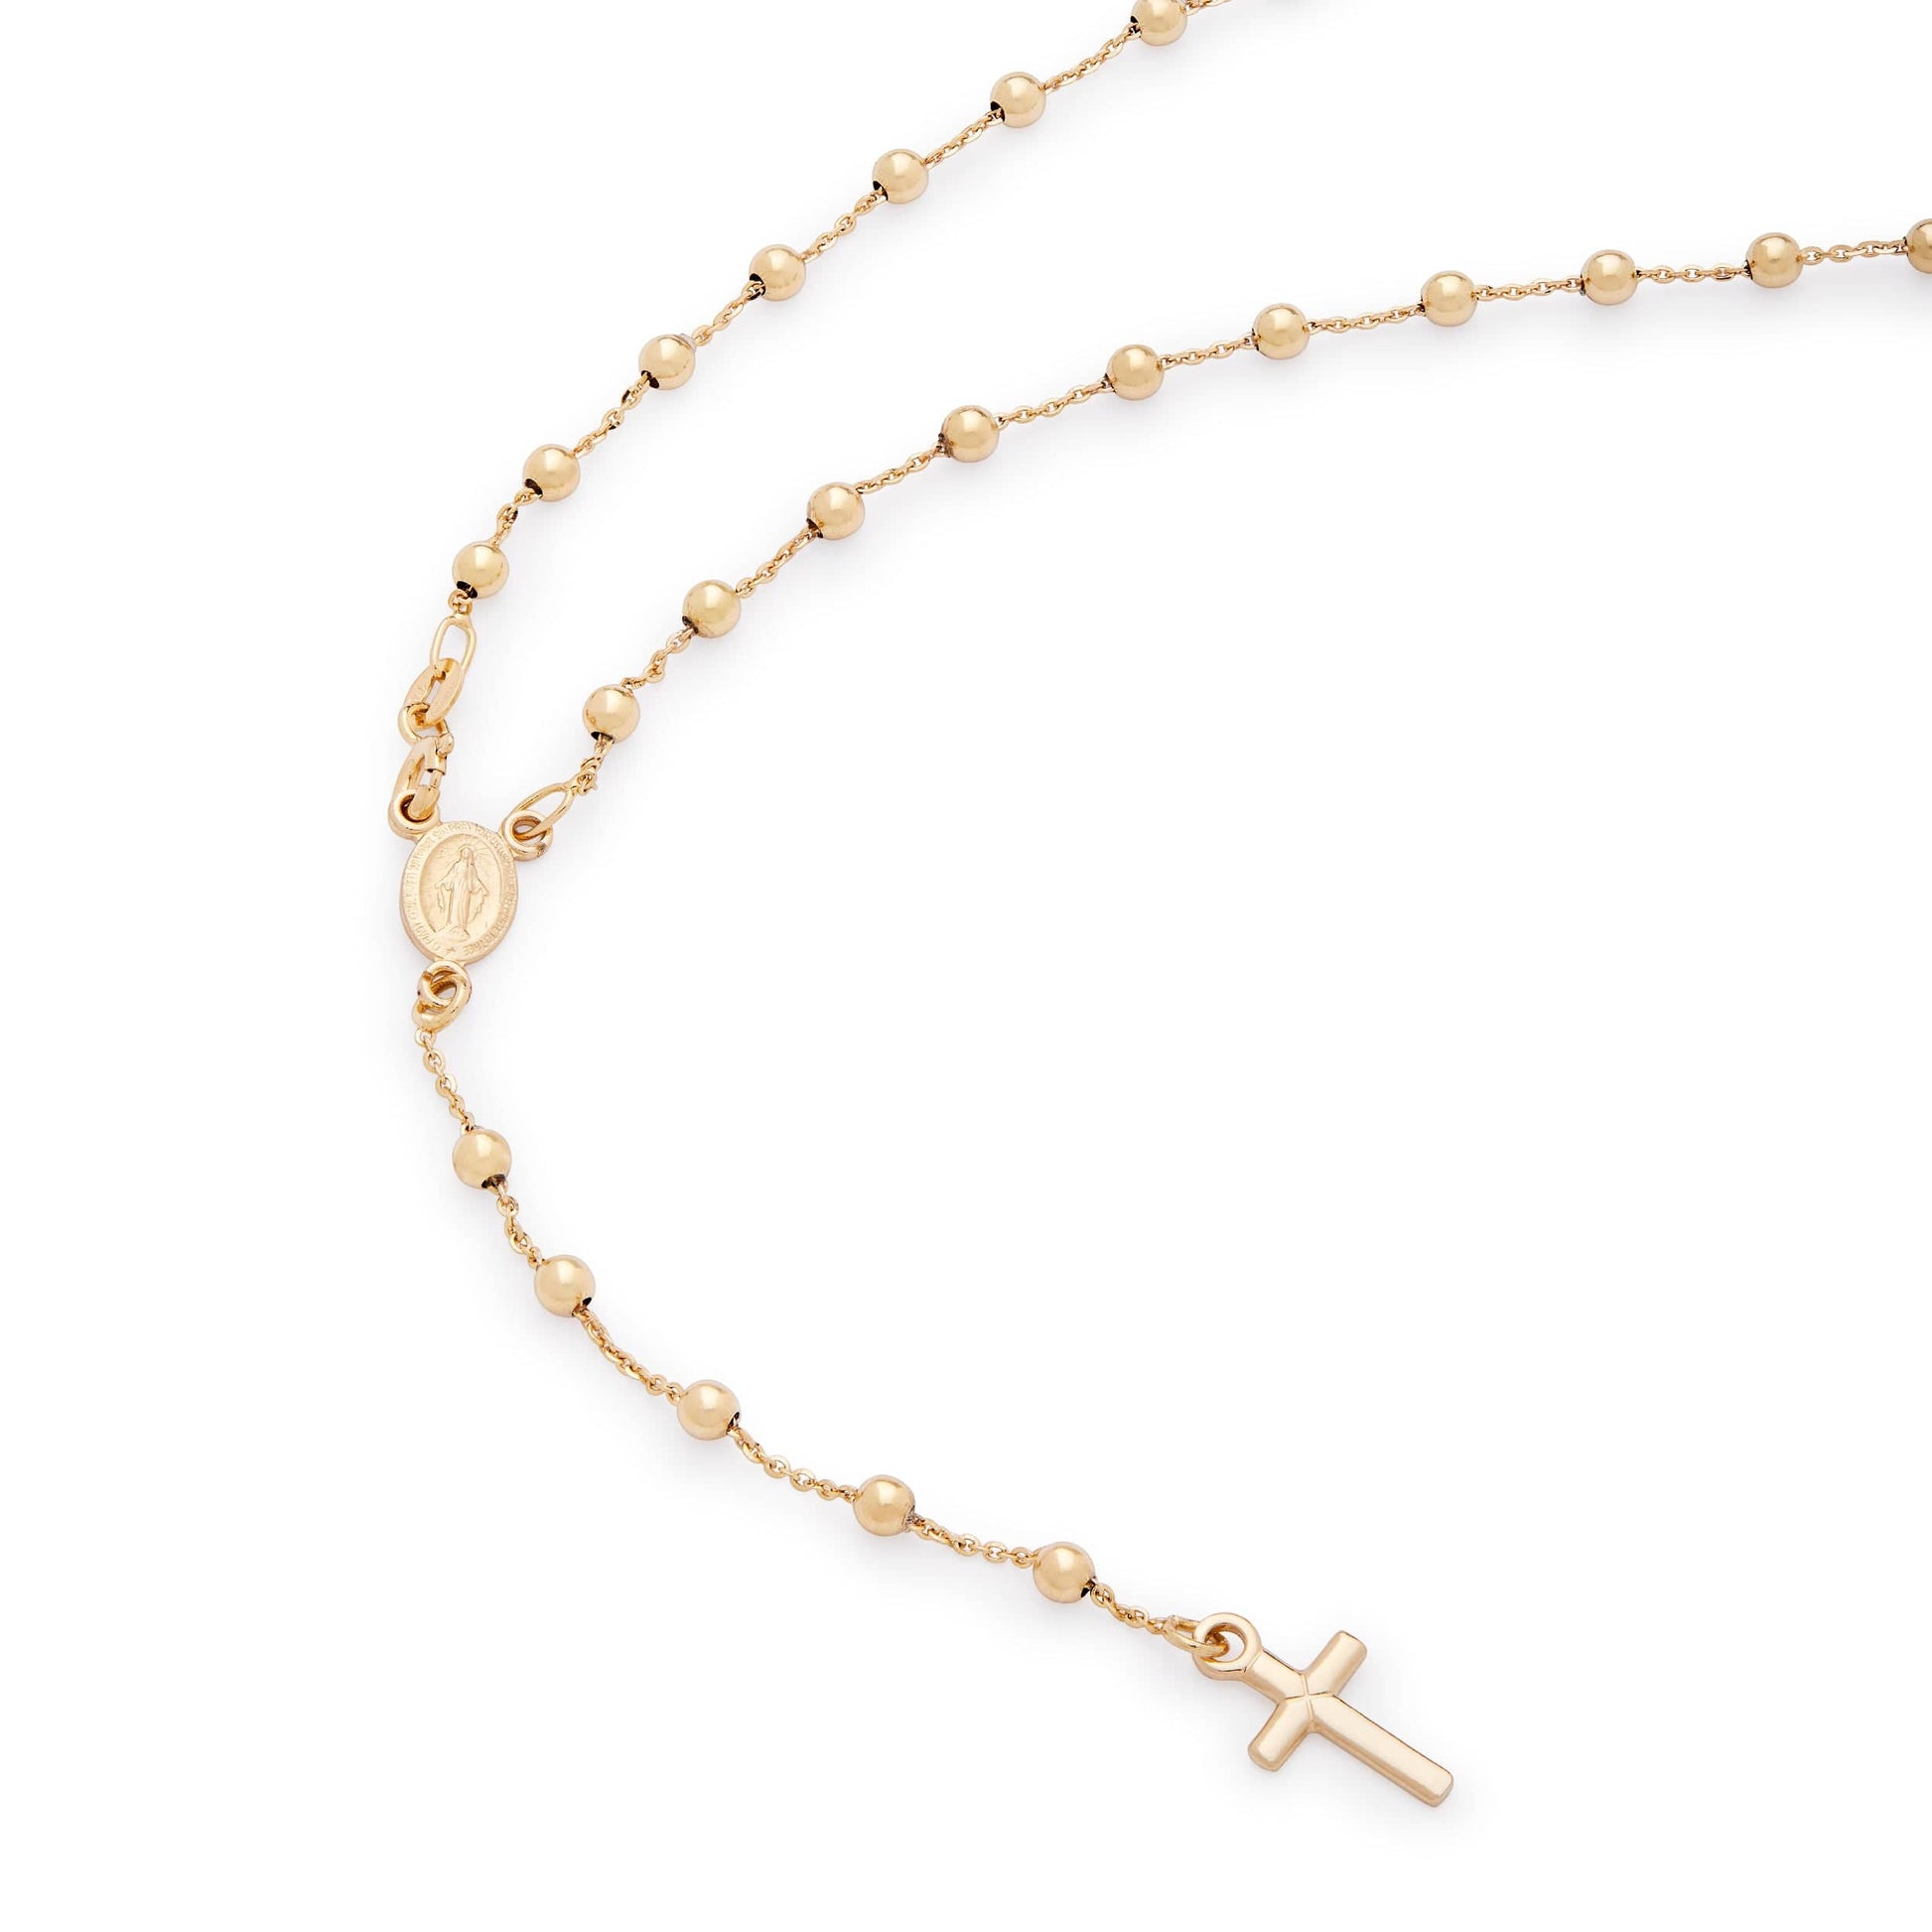 MONDO CATTOLICO Prayer Beads 38 cm (14.96 in) / 3 mm (0.11 in) Yellow Gold Rosary